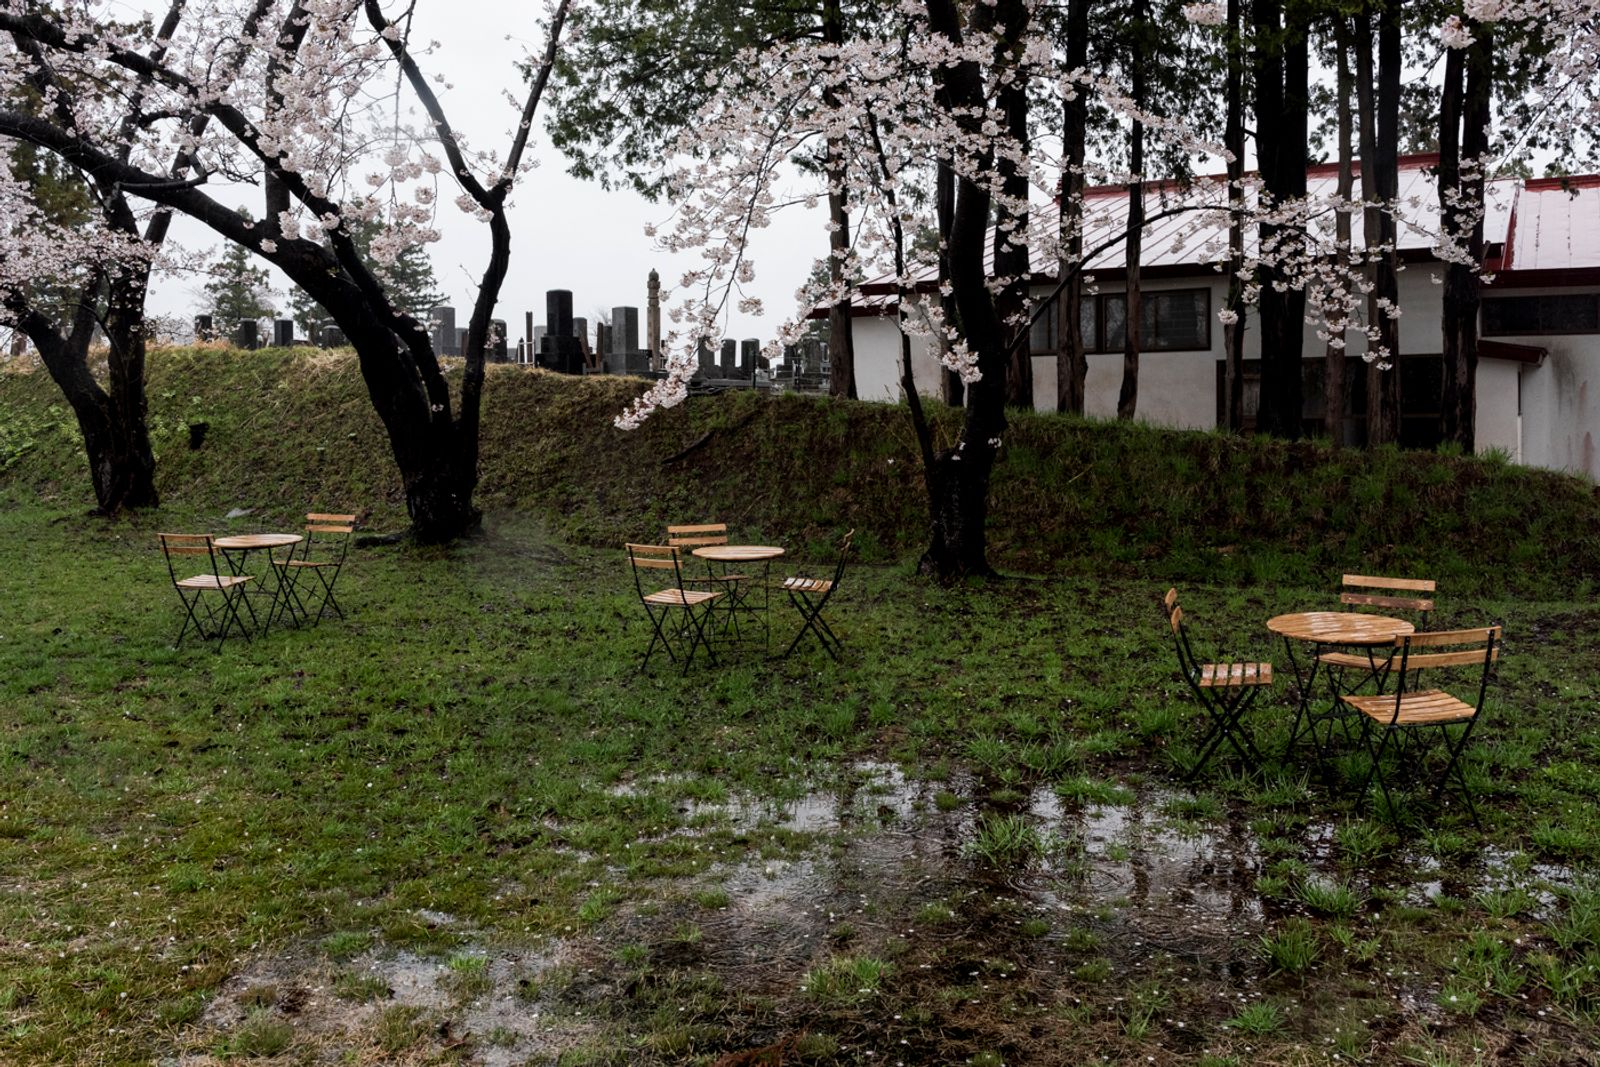 © George Nobechi - Picnic Chairs and Gravestones